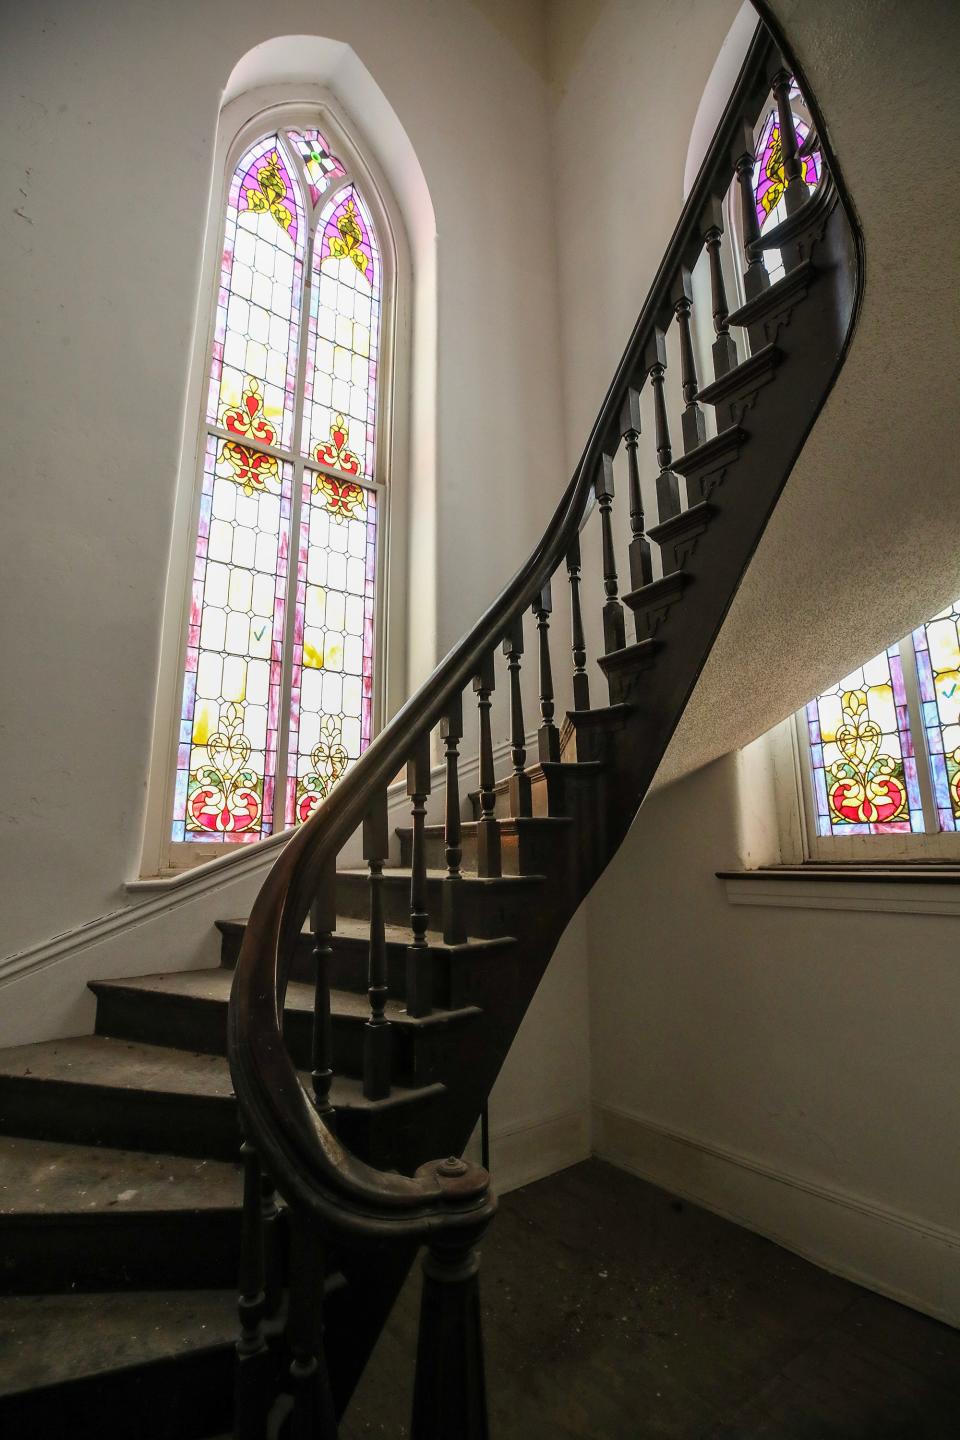 A stairwell at the former Market Street United Methodist Church at 600 E. Market St. in Nulu. The site is the future home of a "brand center" for the Bob Dylan co-founded Heaven's Door whiskey.